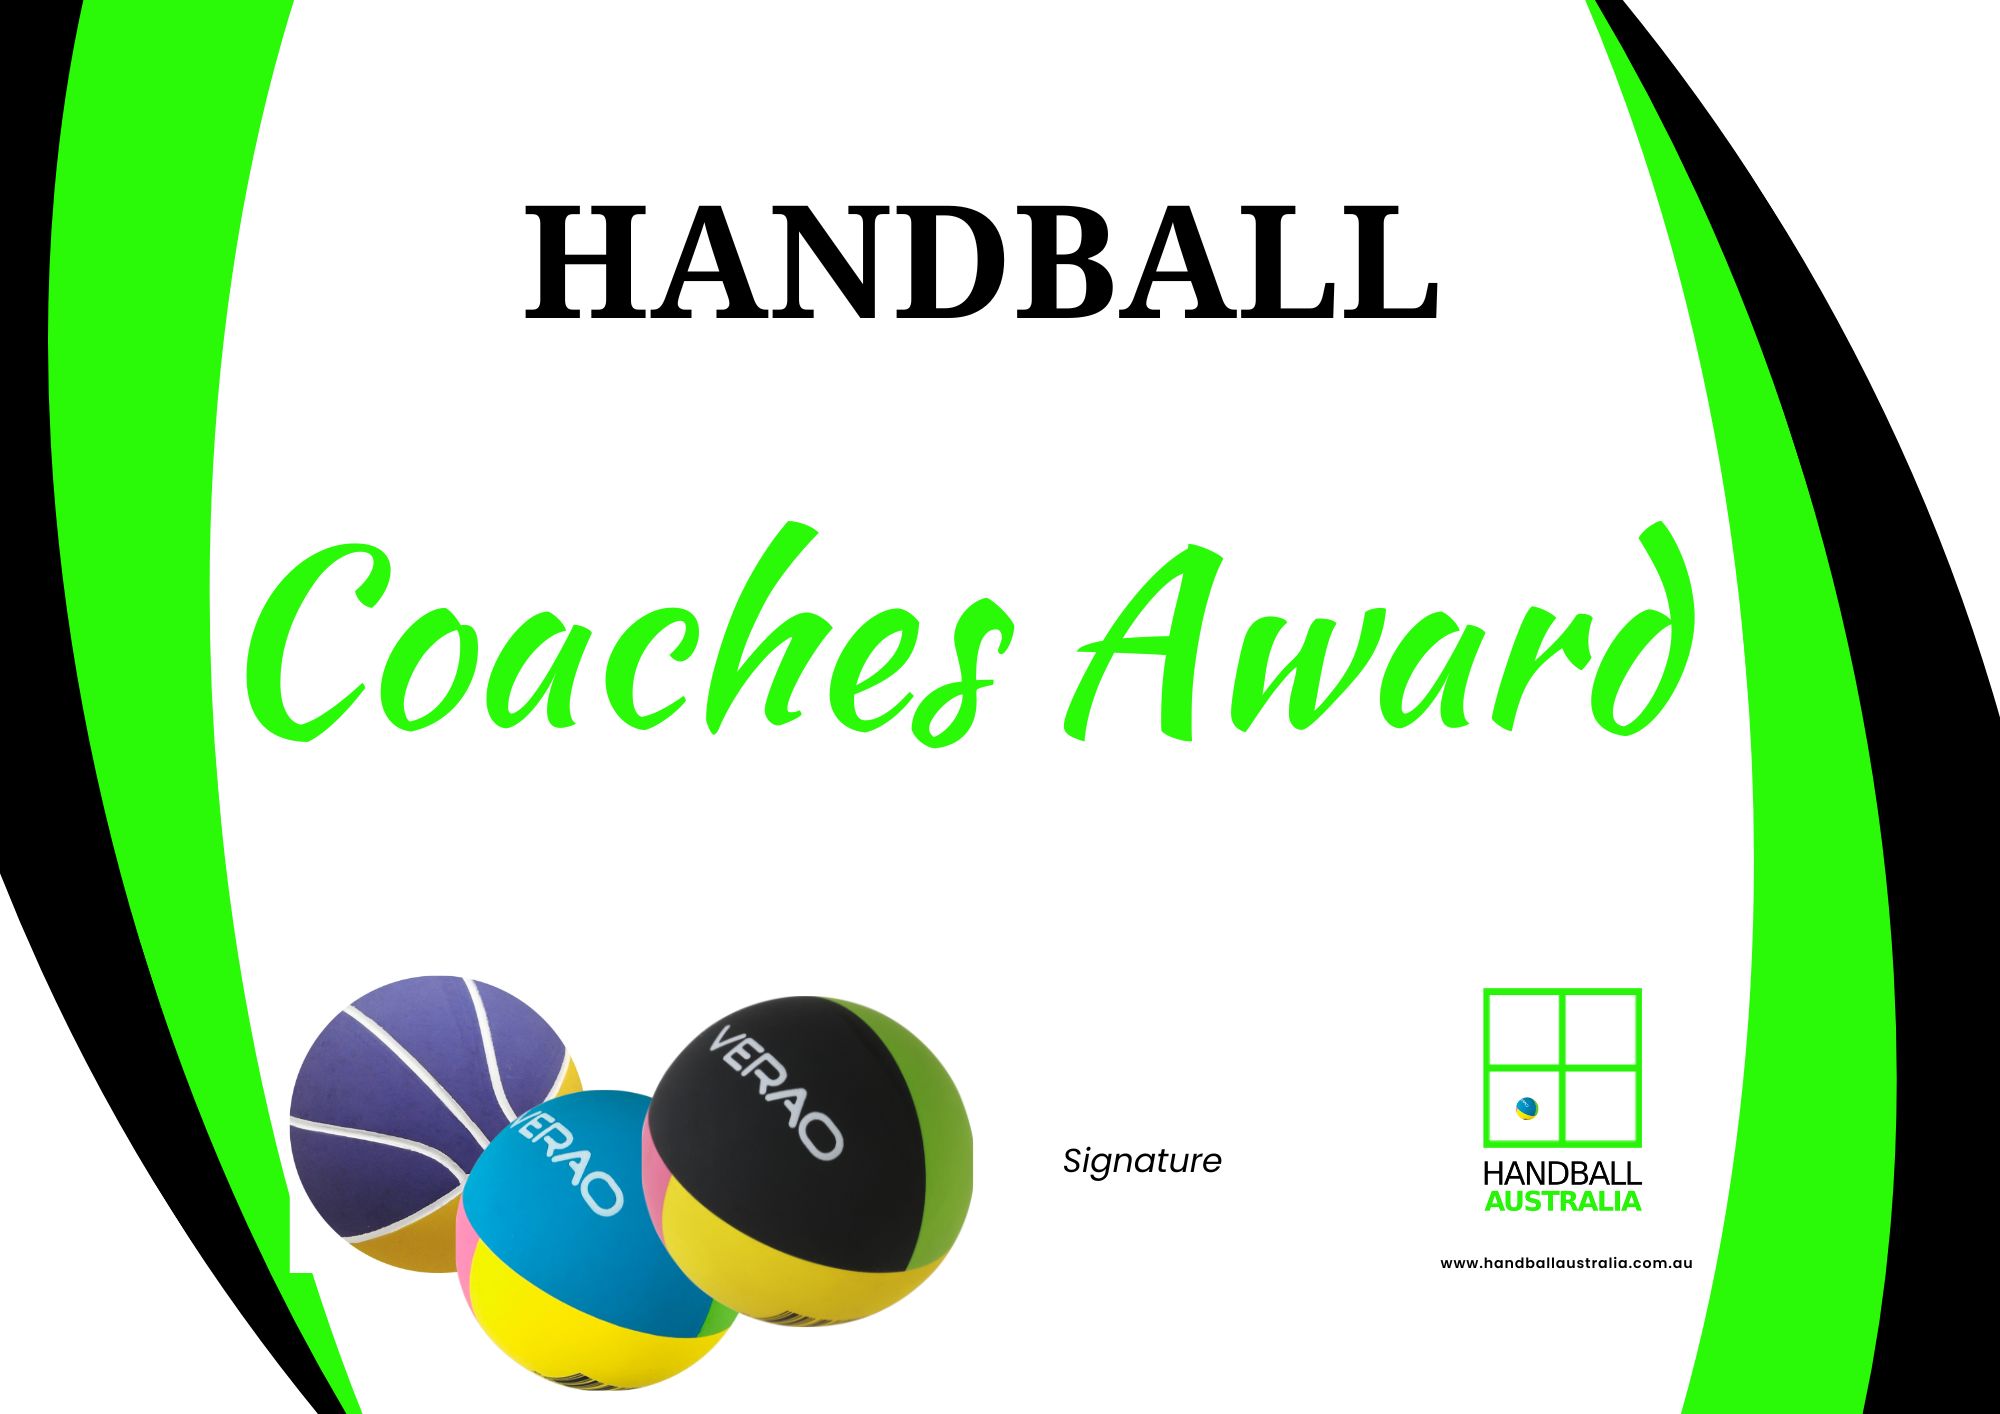 Ball - Coaches award - for consistent effort